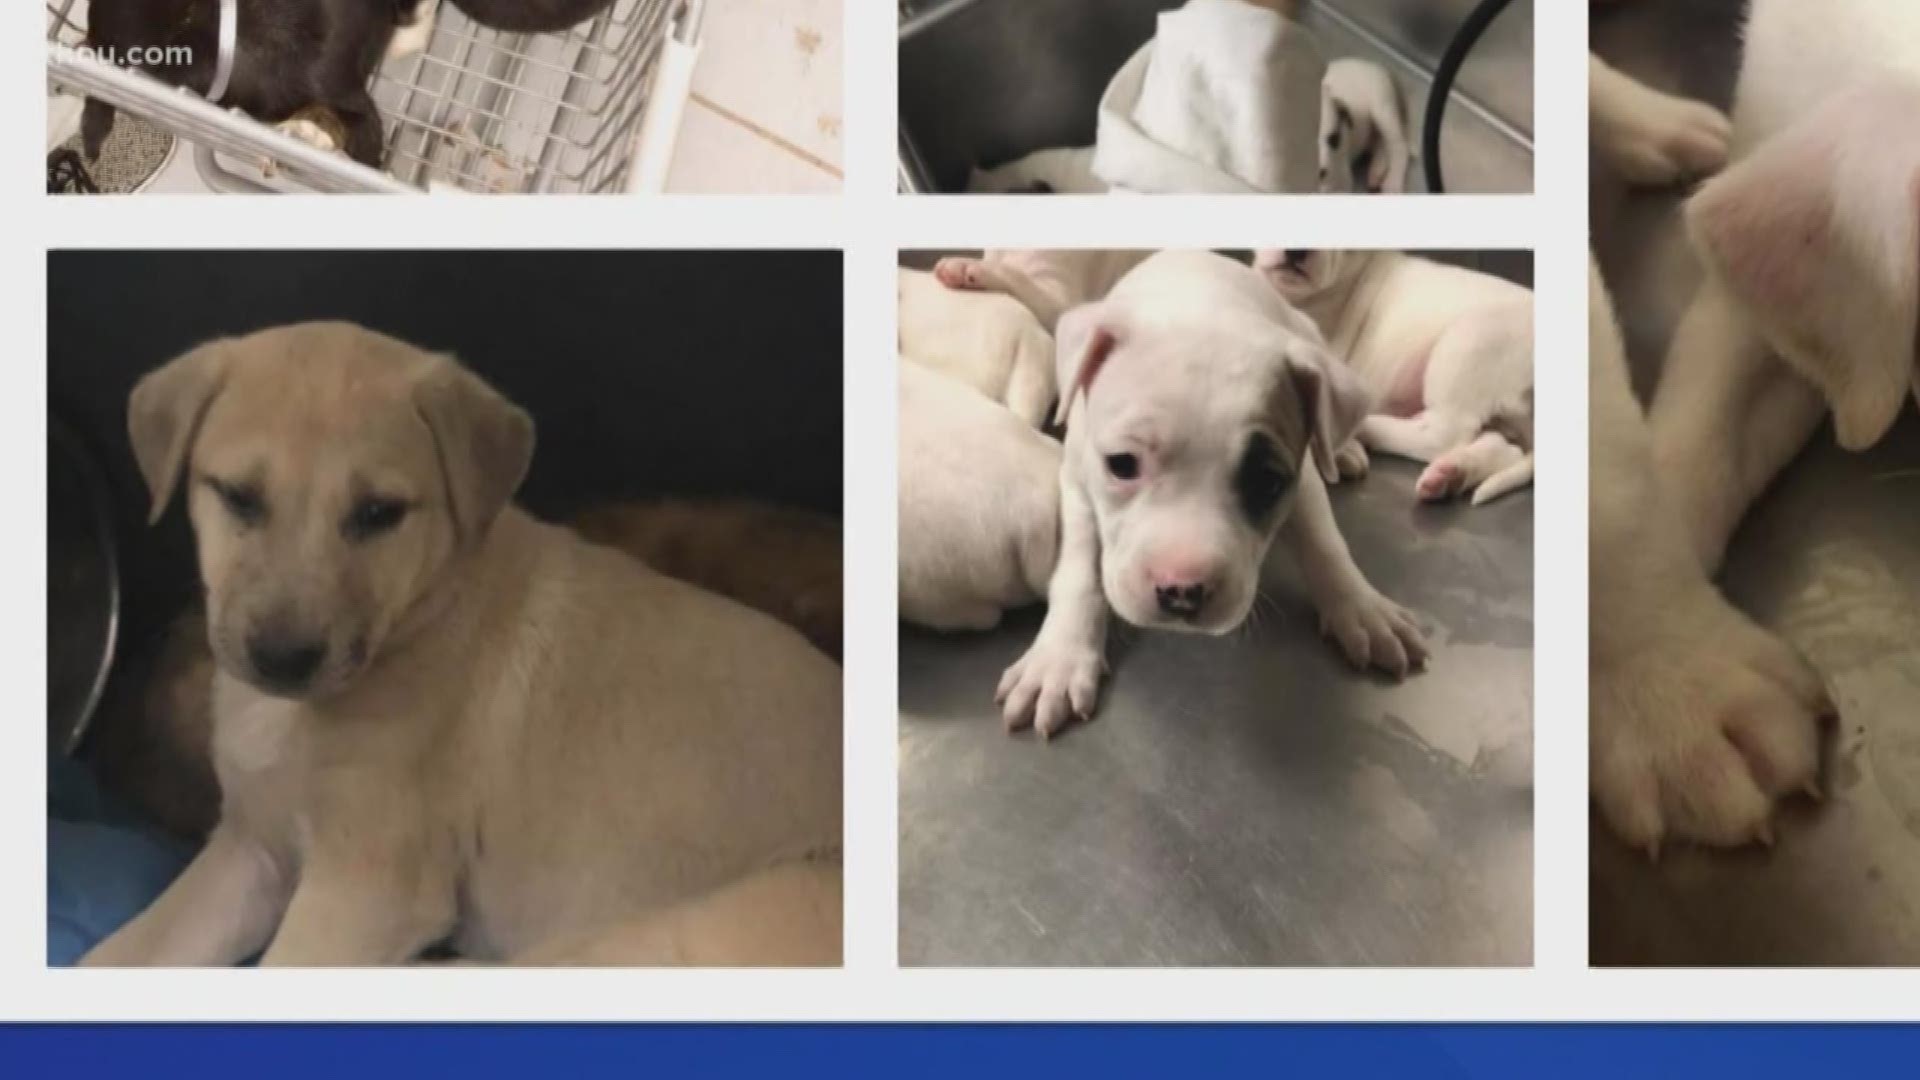 Over 230 dogs and cats were taken into the Montgomery County Animal Shelter in just 4 days. The shelter is asking people to adopt or foster them.